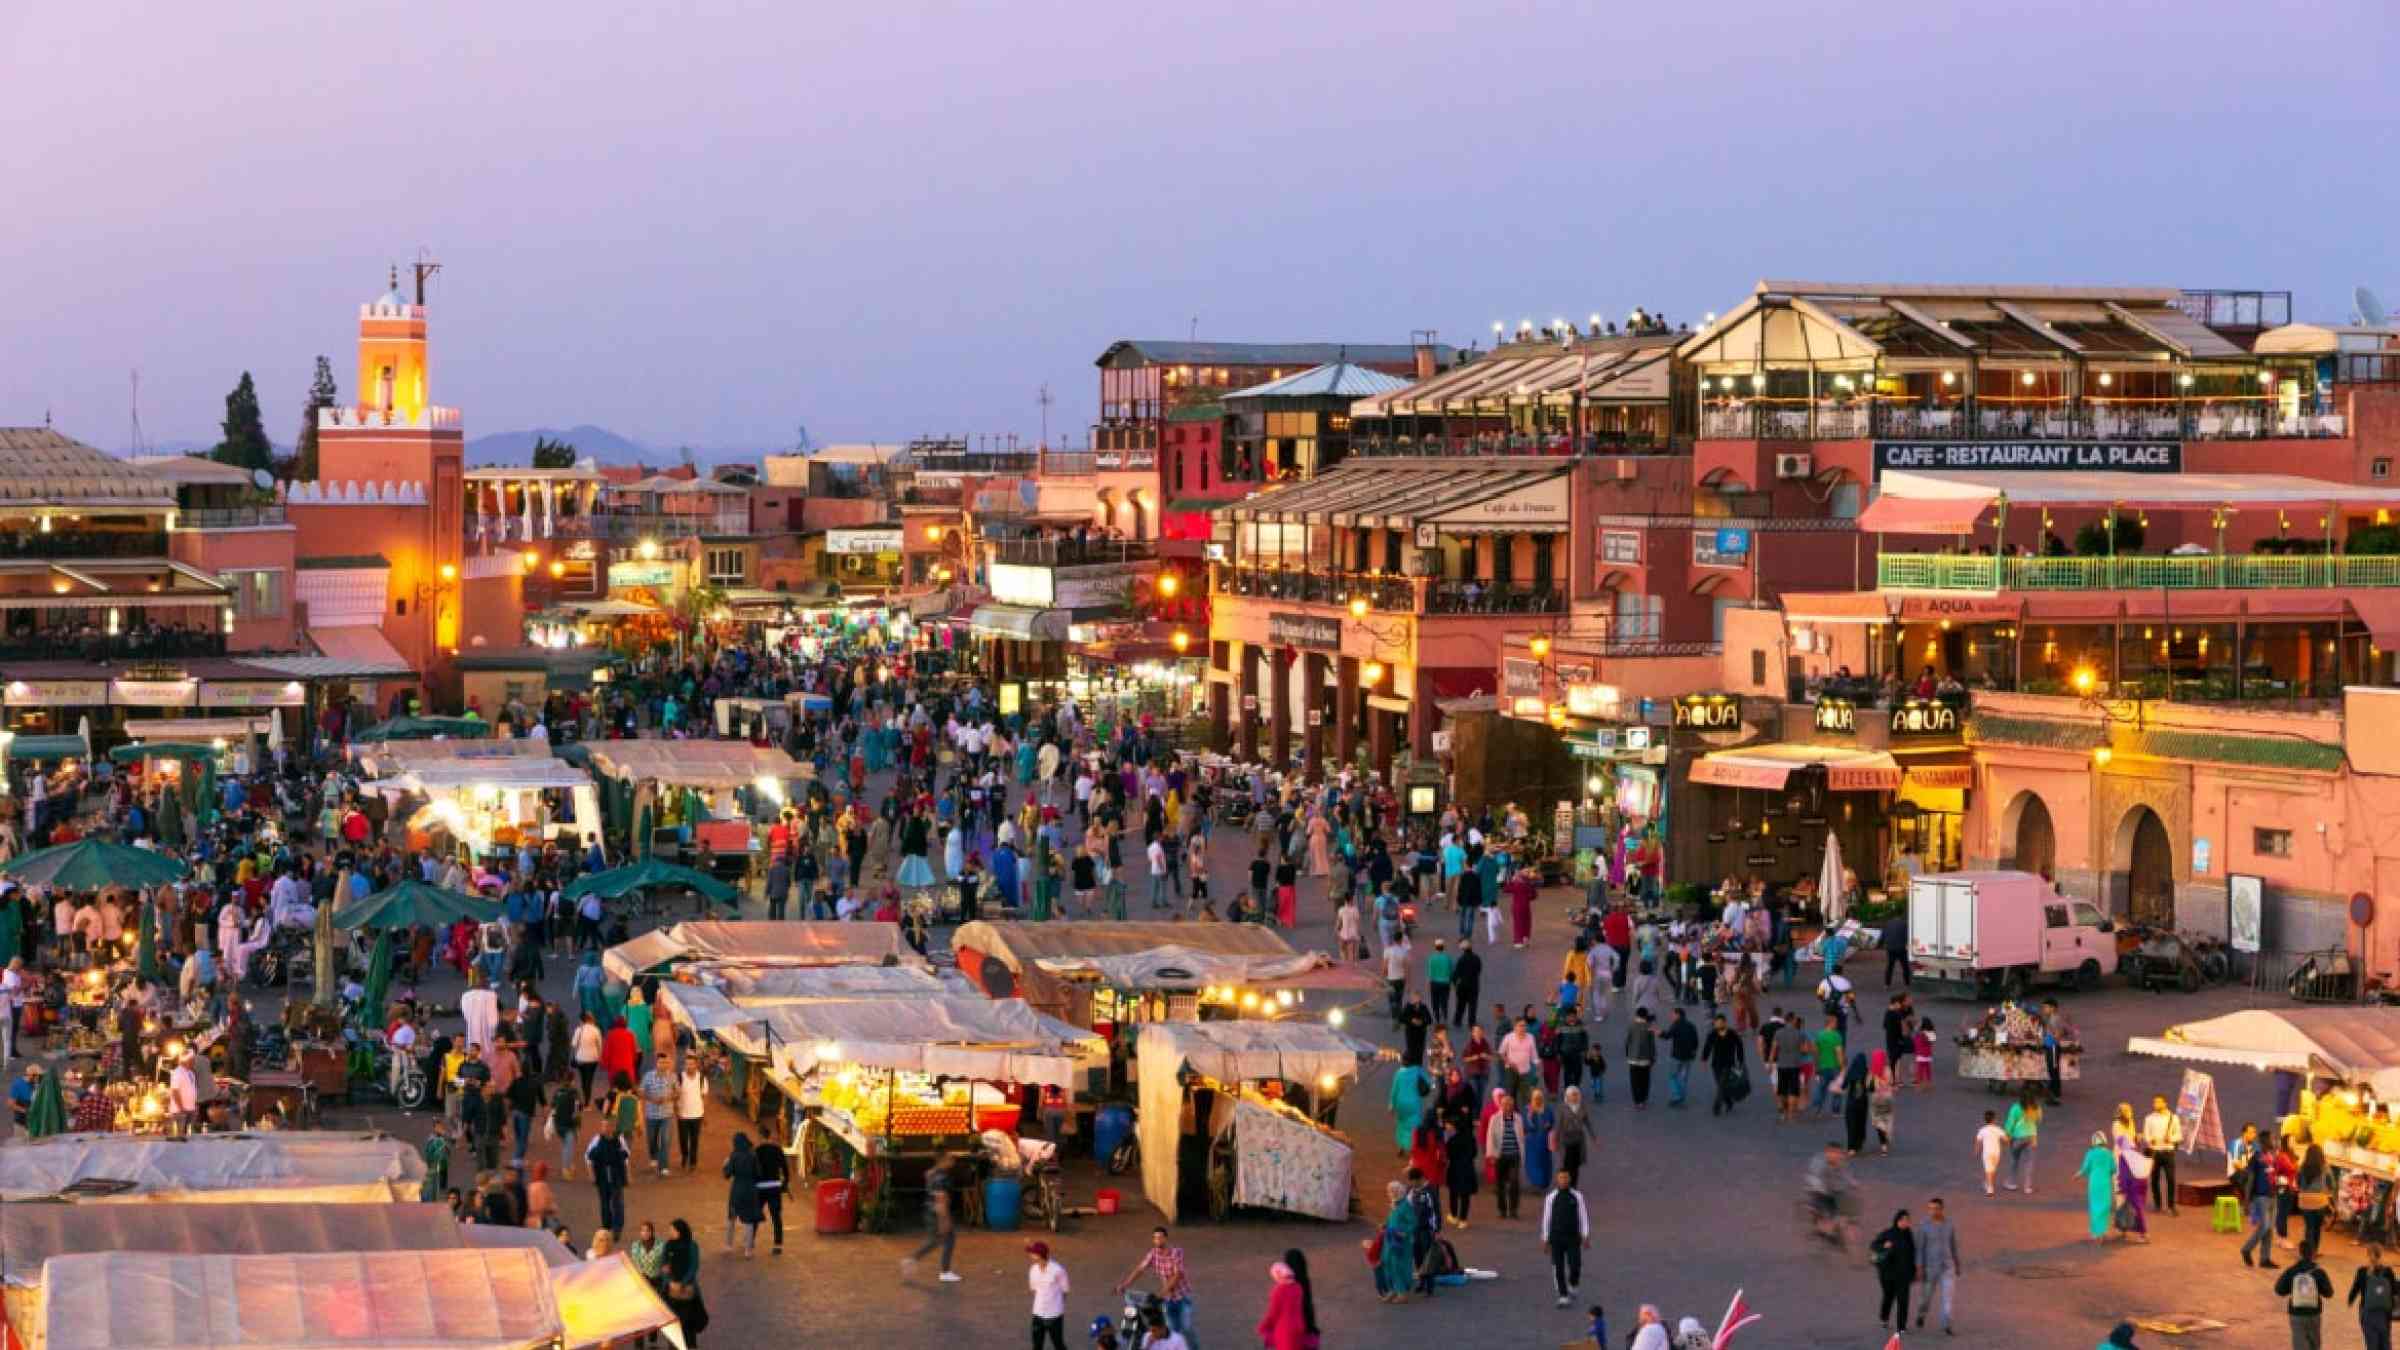 Tourists and locals on the Djemaa-el-Fna square during sunset in Marrakesh.